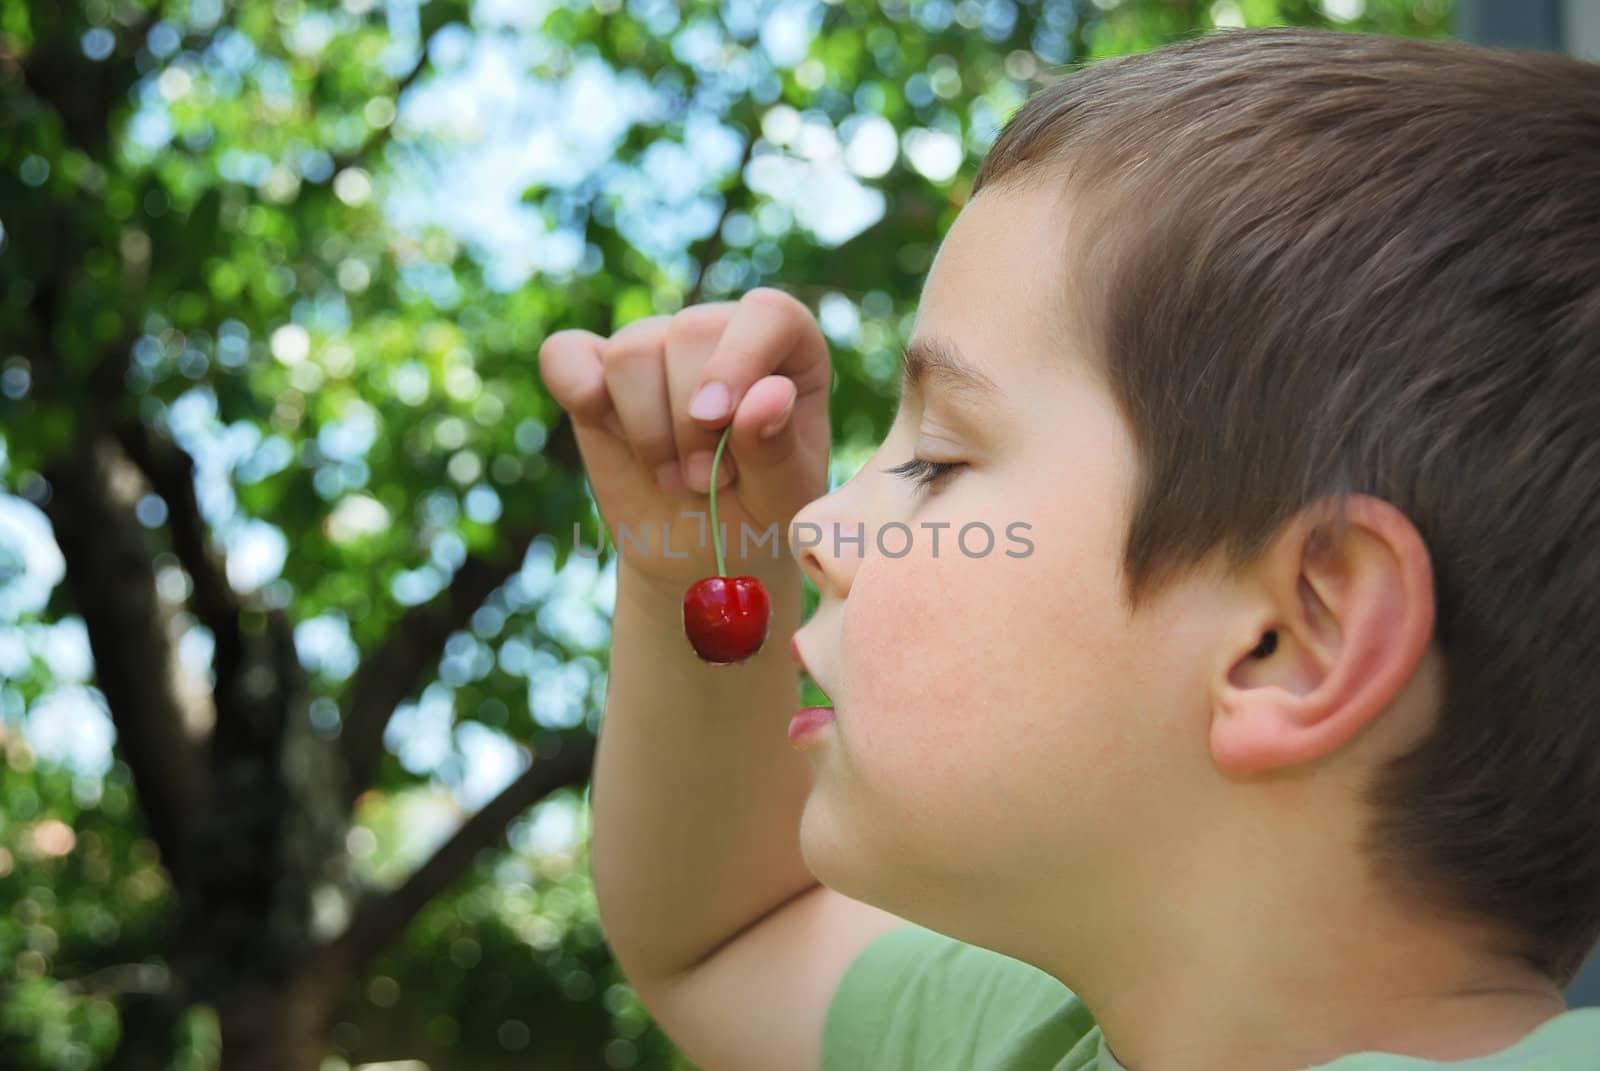 Boy holding a bing cherry in his hand in the front of his mouth like a sweet temptation.